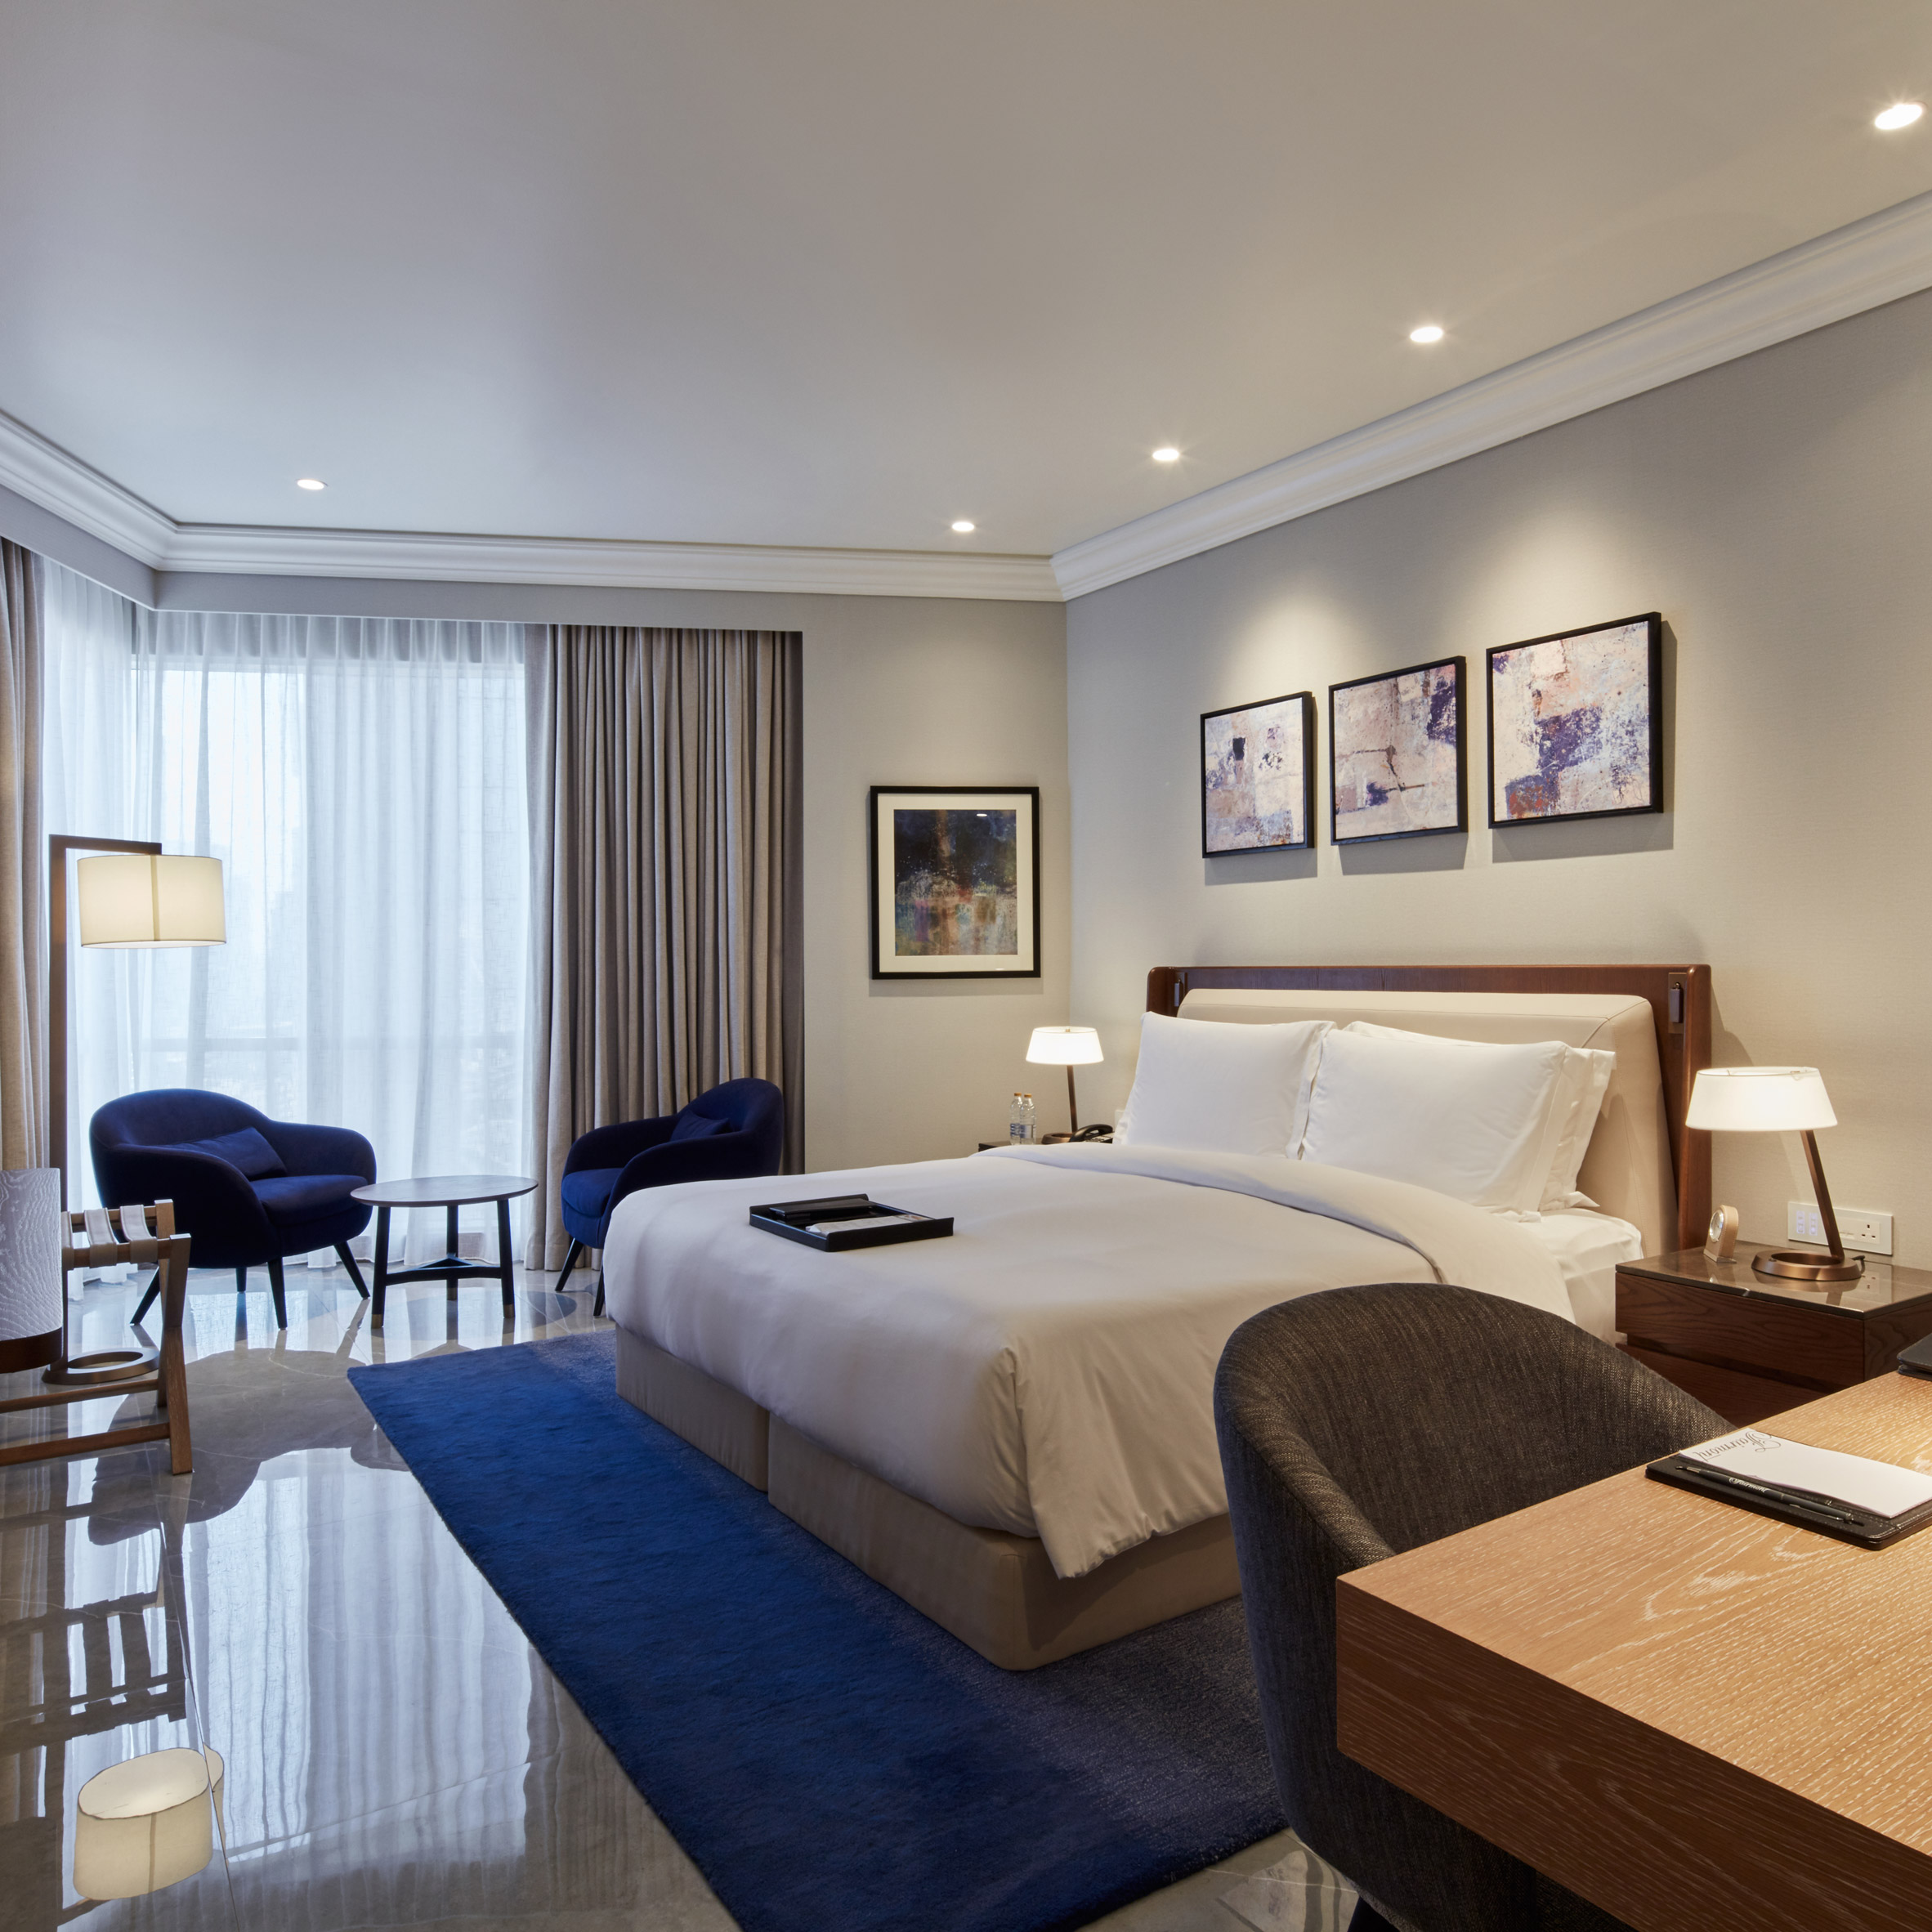 A photograph of a bedroom within one of the Fairmont Dubai's rooms